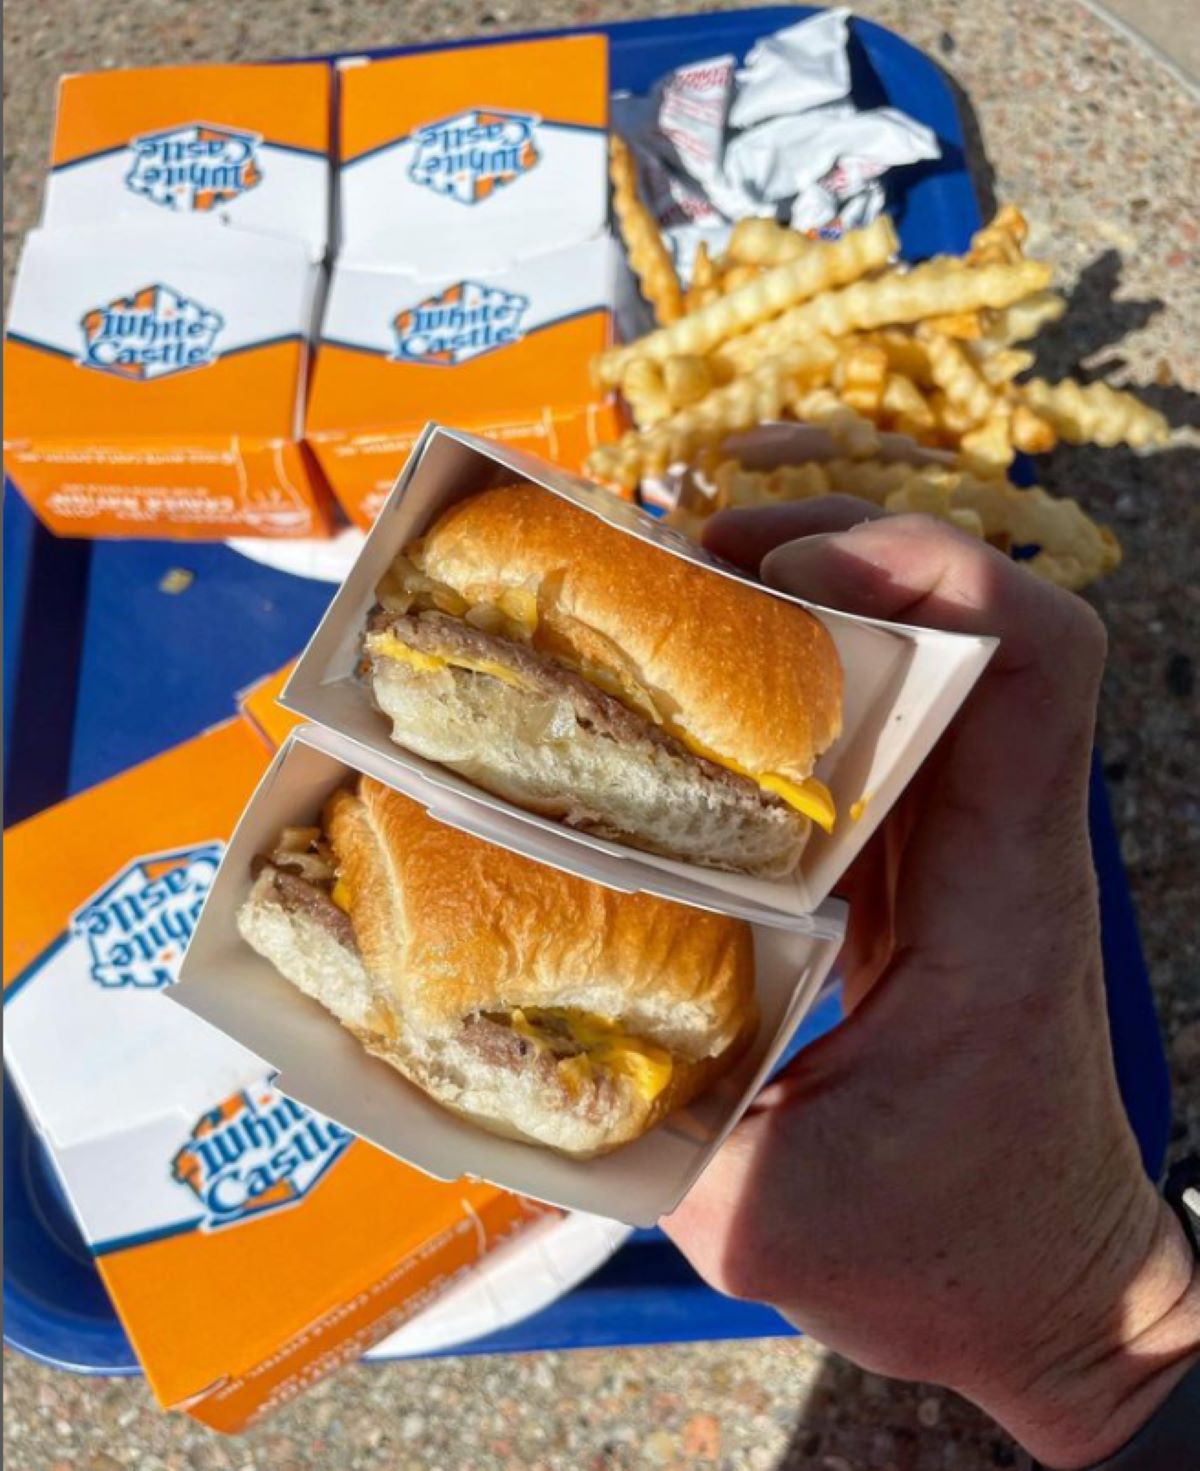 An Area White Castle Files Permit to Make an Upgrade to its Drive-Thru